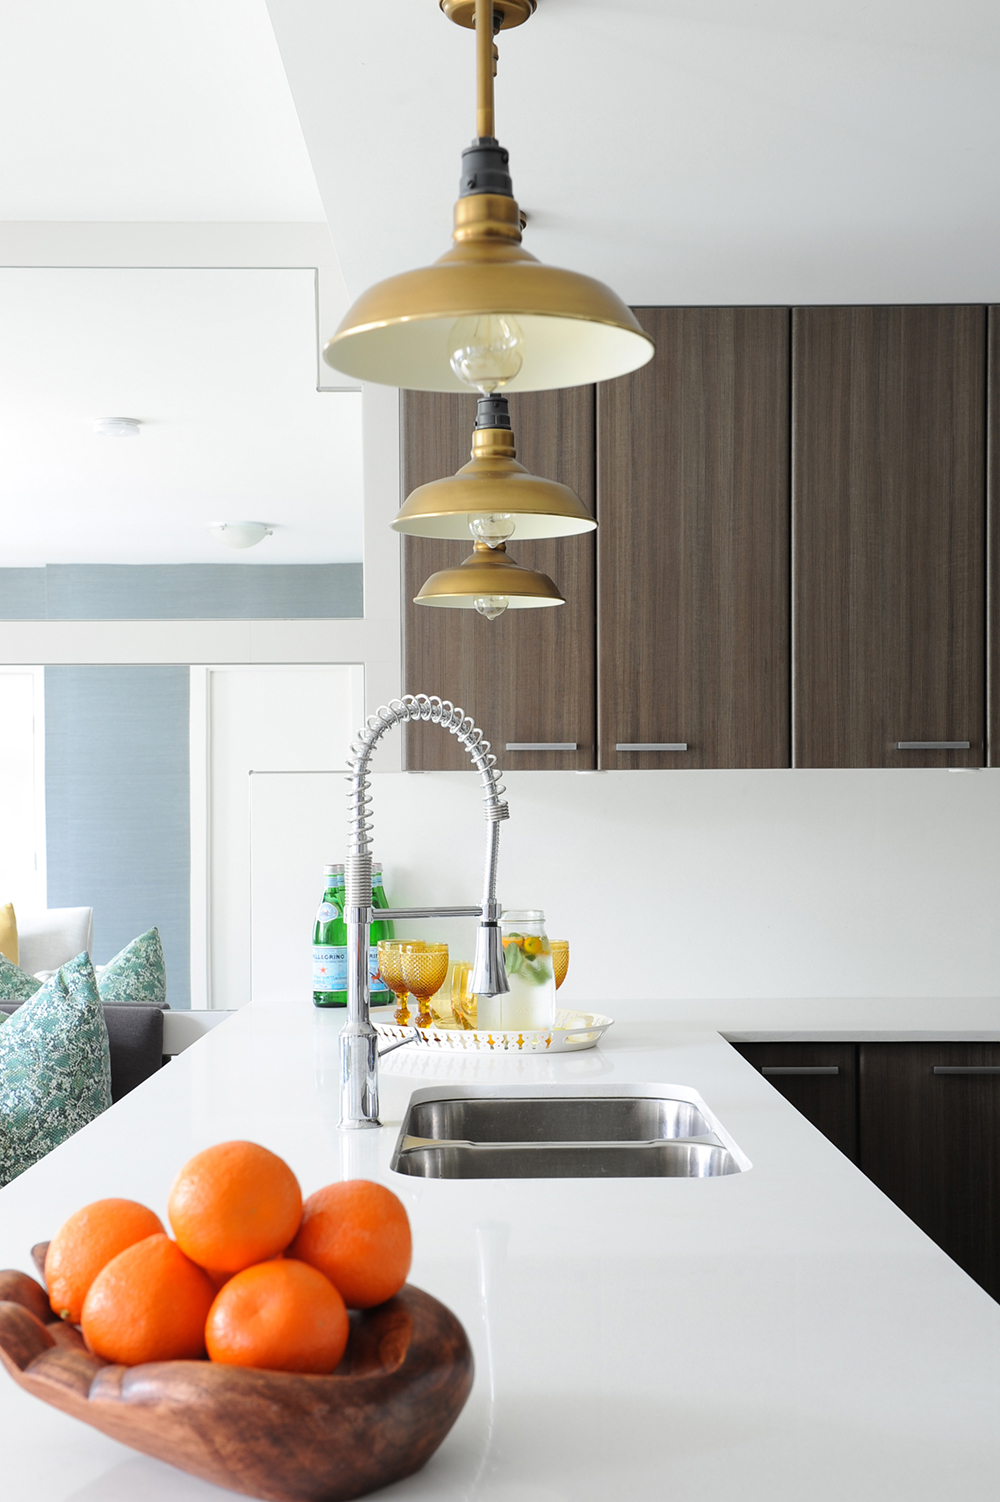 An eclectic kitchen with industrial-style light fixtures.